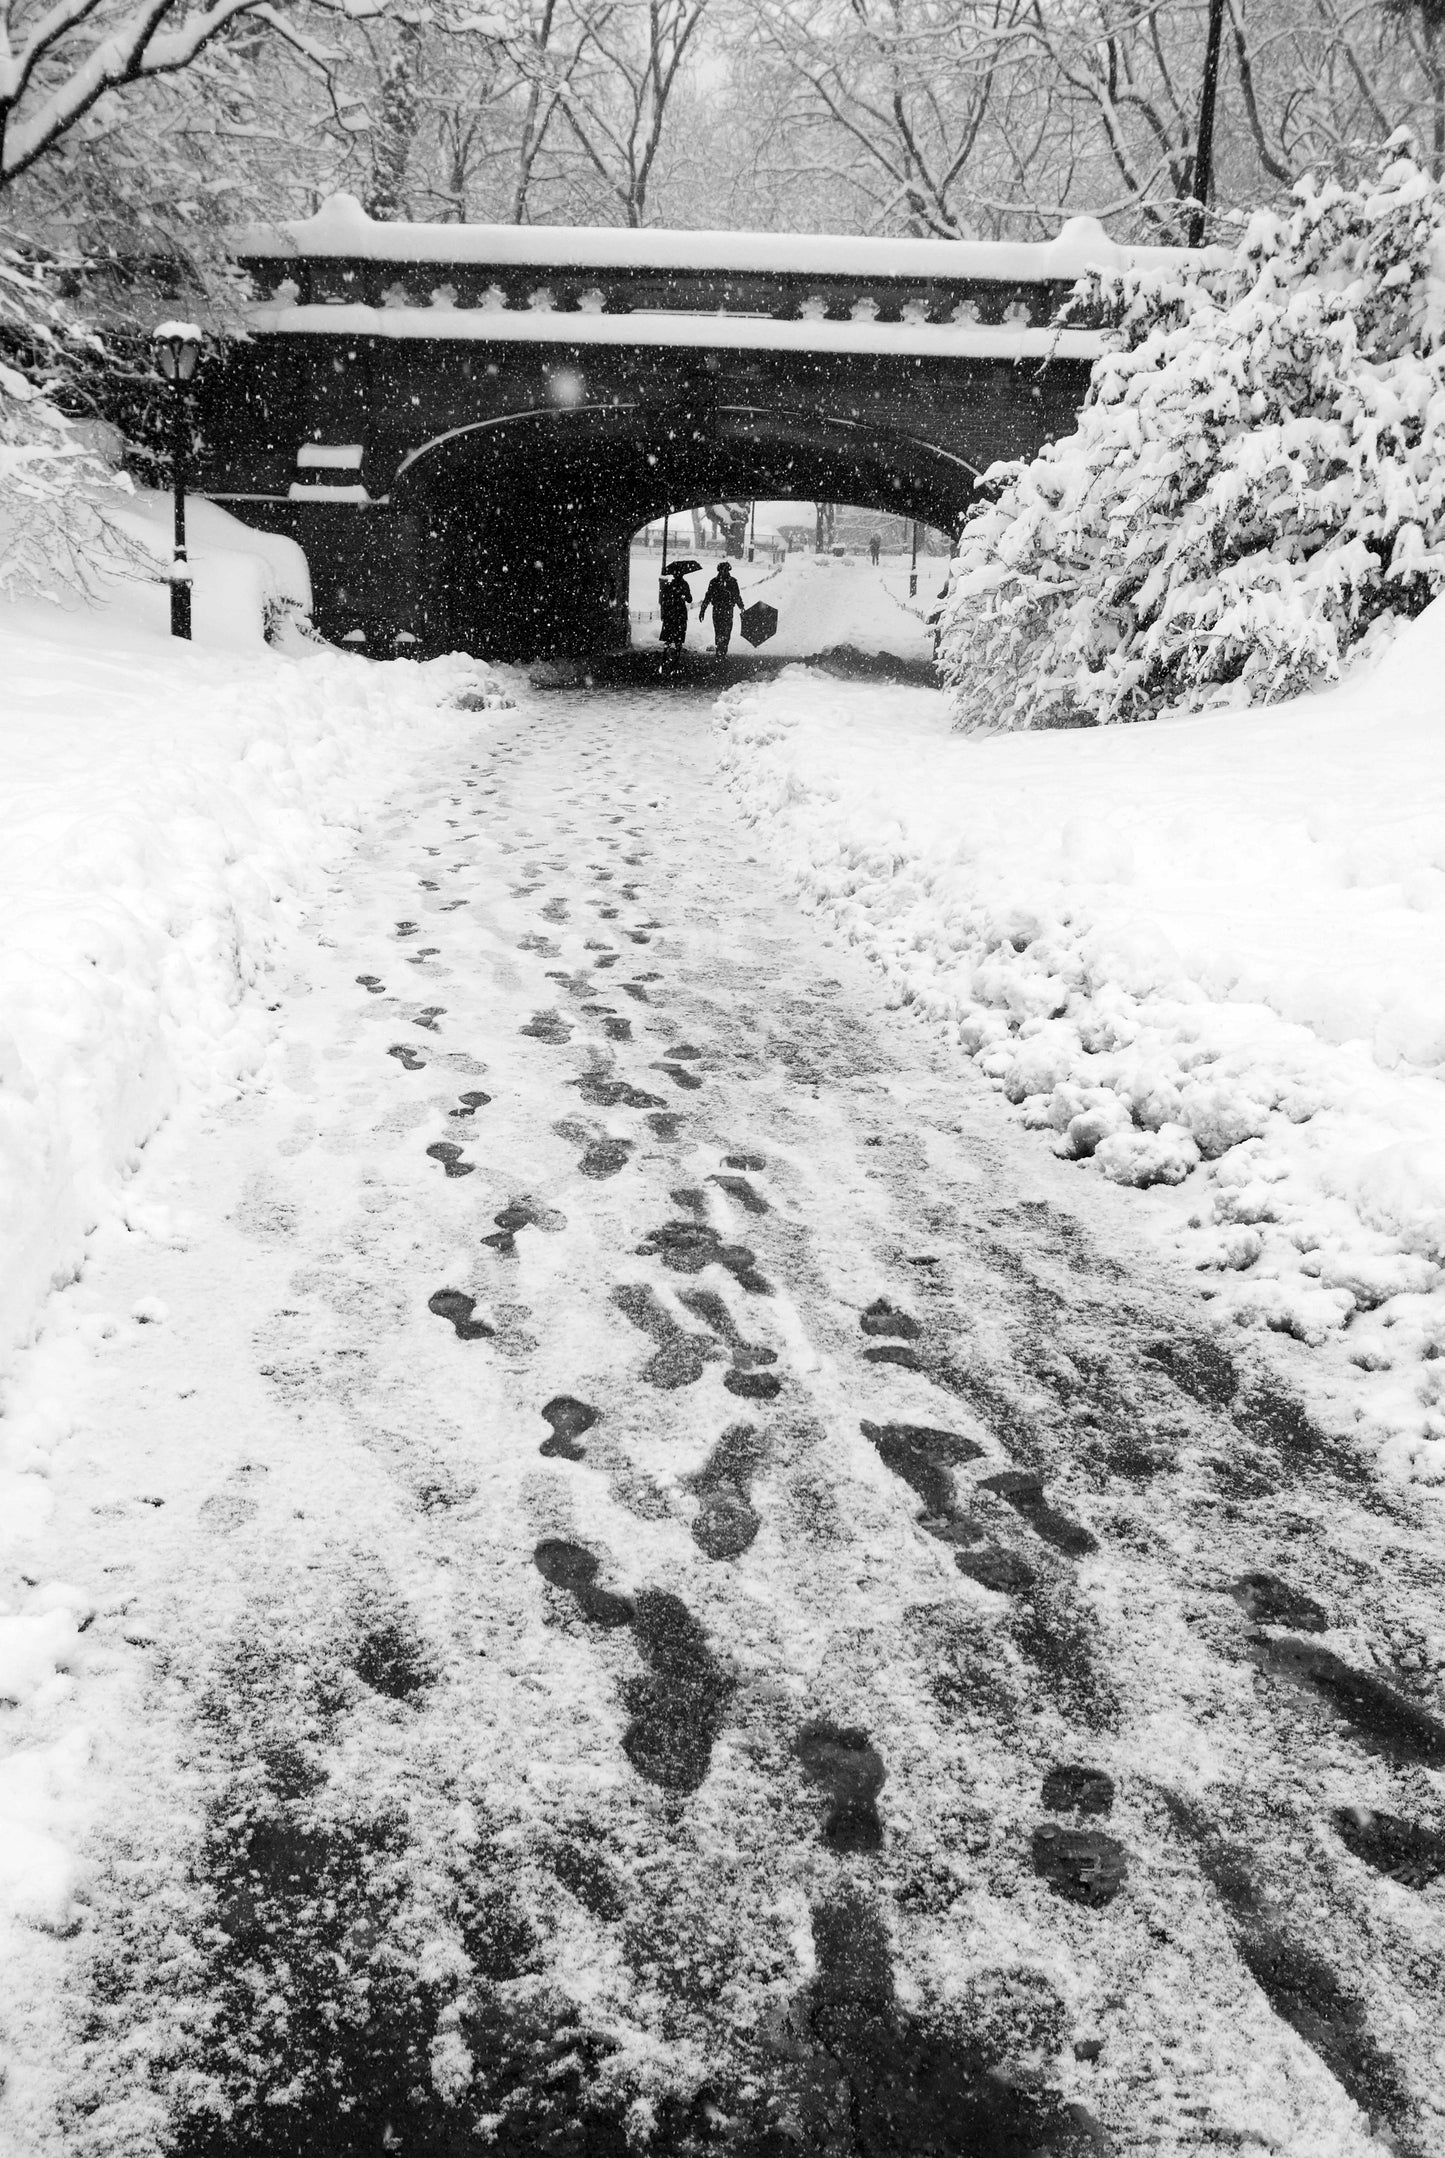 Alessandra Mattanza | FOOT PRINTS UNDER A BRIDGE, Central Park, New York. The snowy impression of people passing under the Driprock Arch in Central Park. Available as a photographic print on acrylic glass.